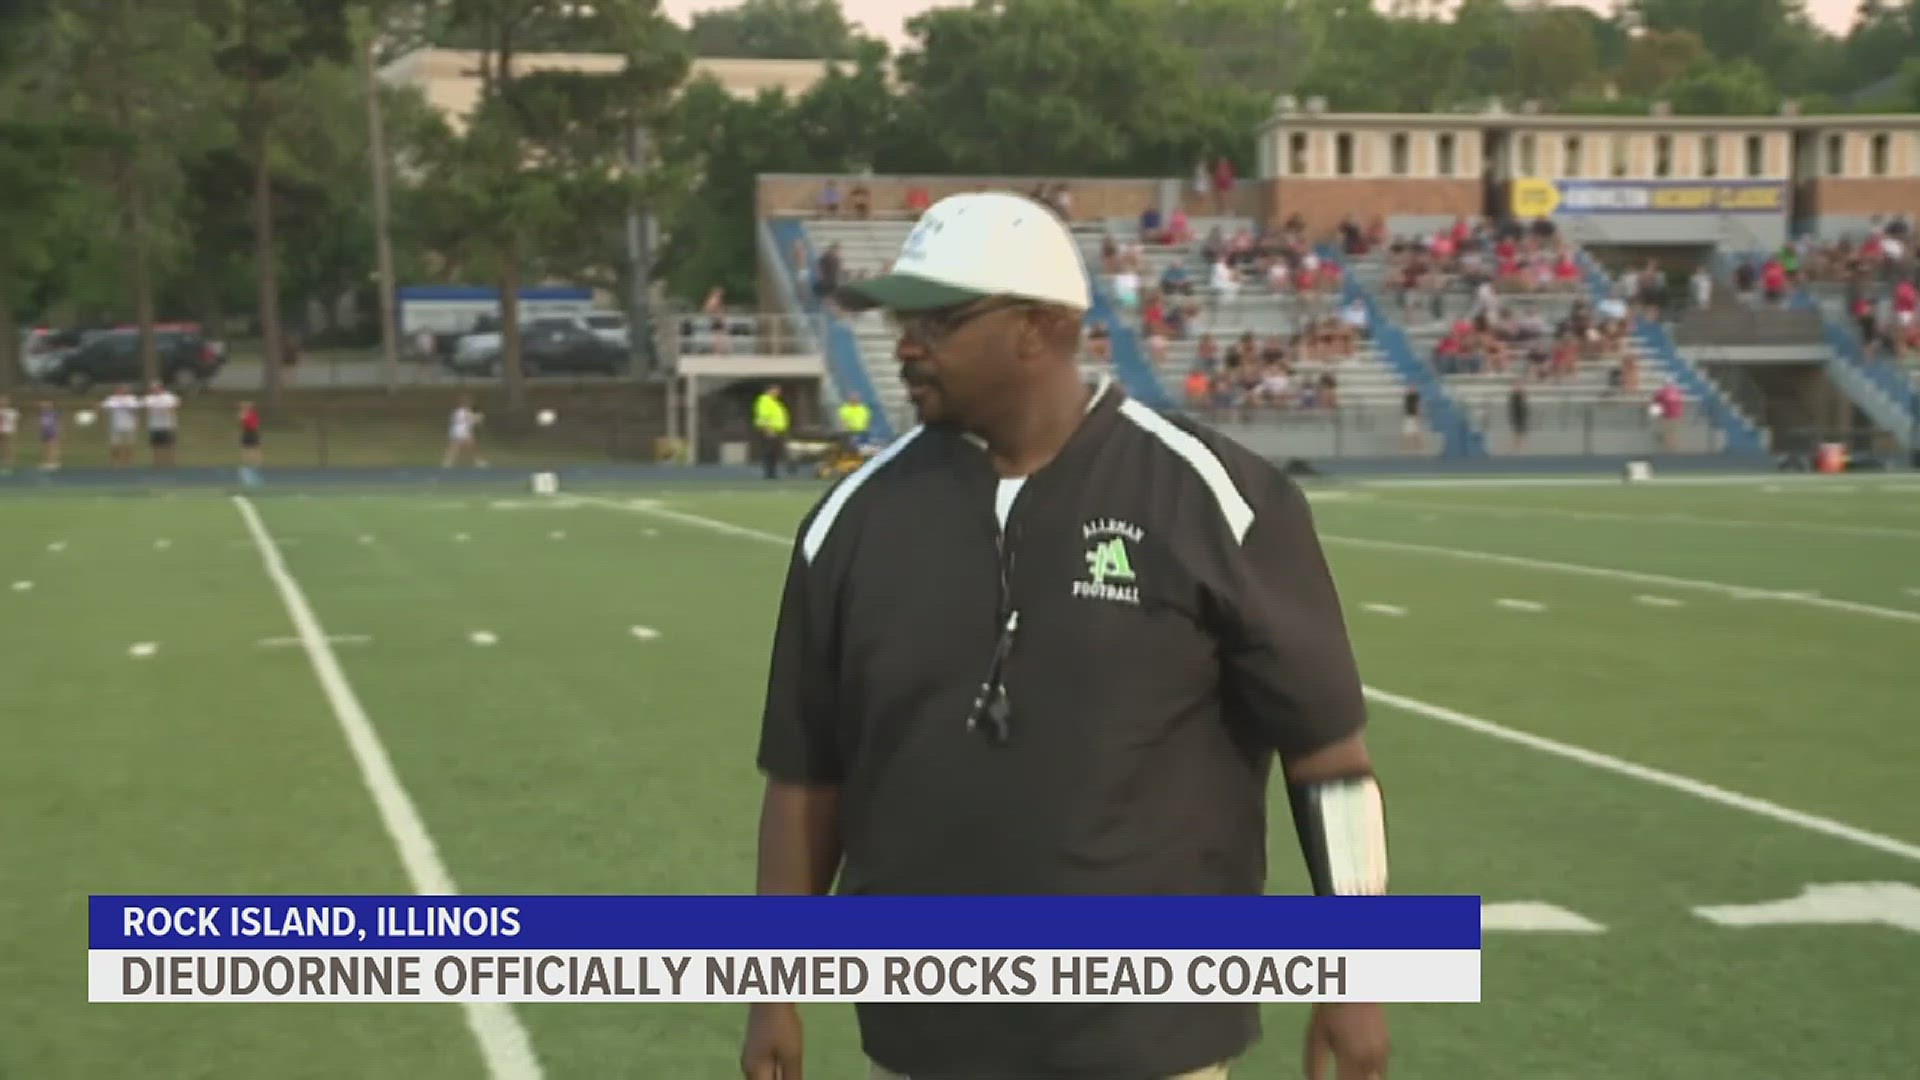 Fritz Dieudonne becomes the 23rd Head Football Coach in Rock Island history.